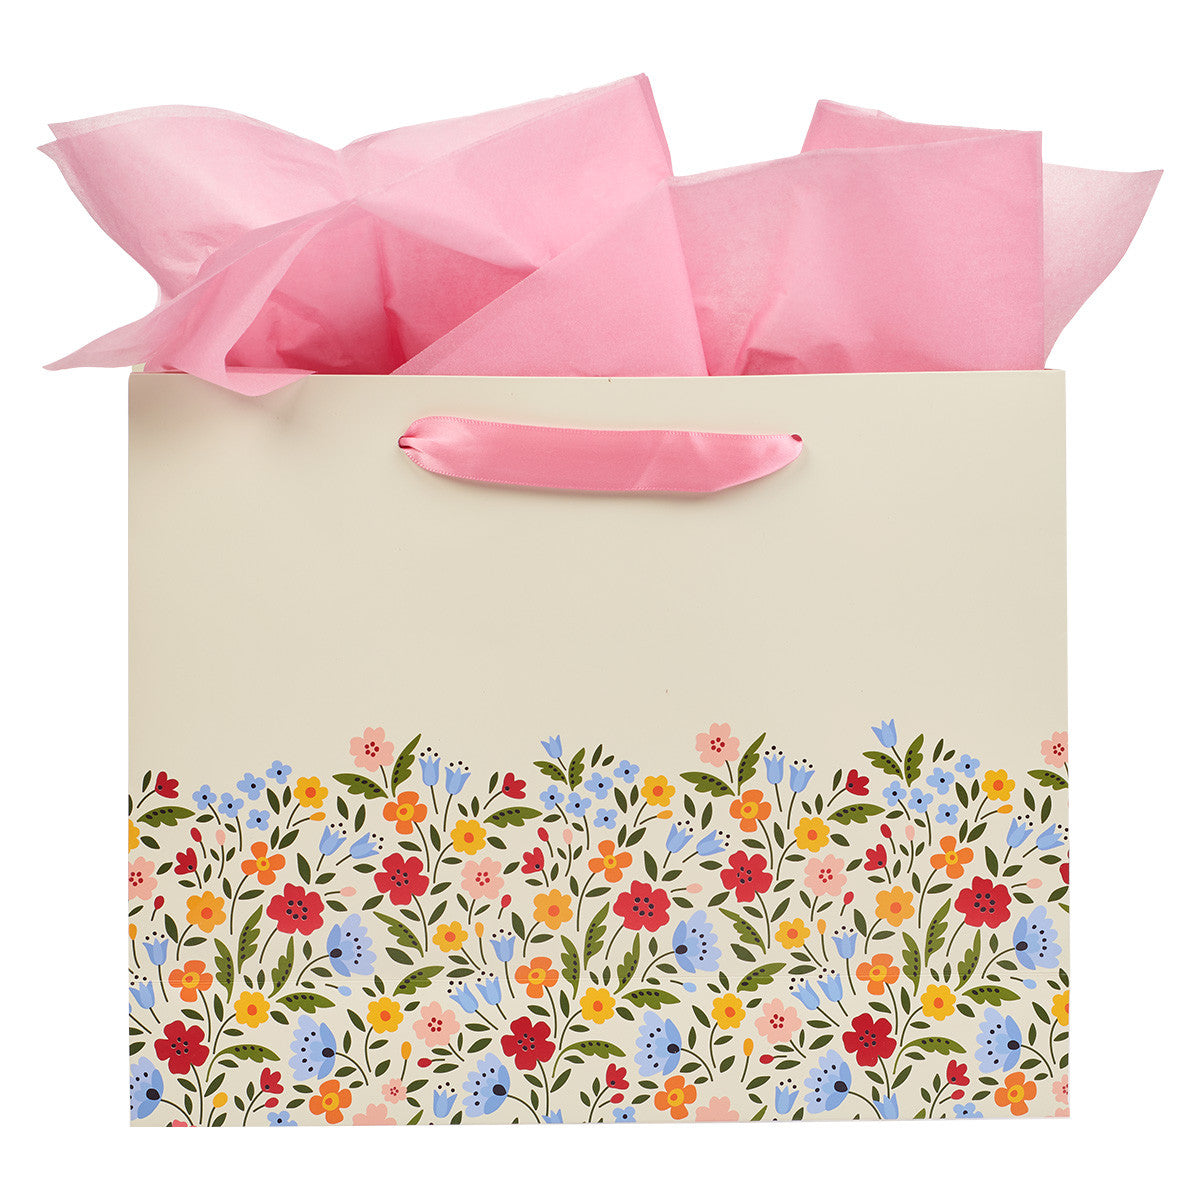 Every Good & Perfect Gift Peach Floral Large Landscape Gift Bag and Card Set - James 1:17 - The Christian Gift Company